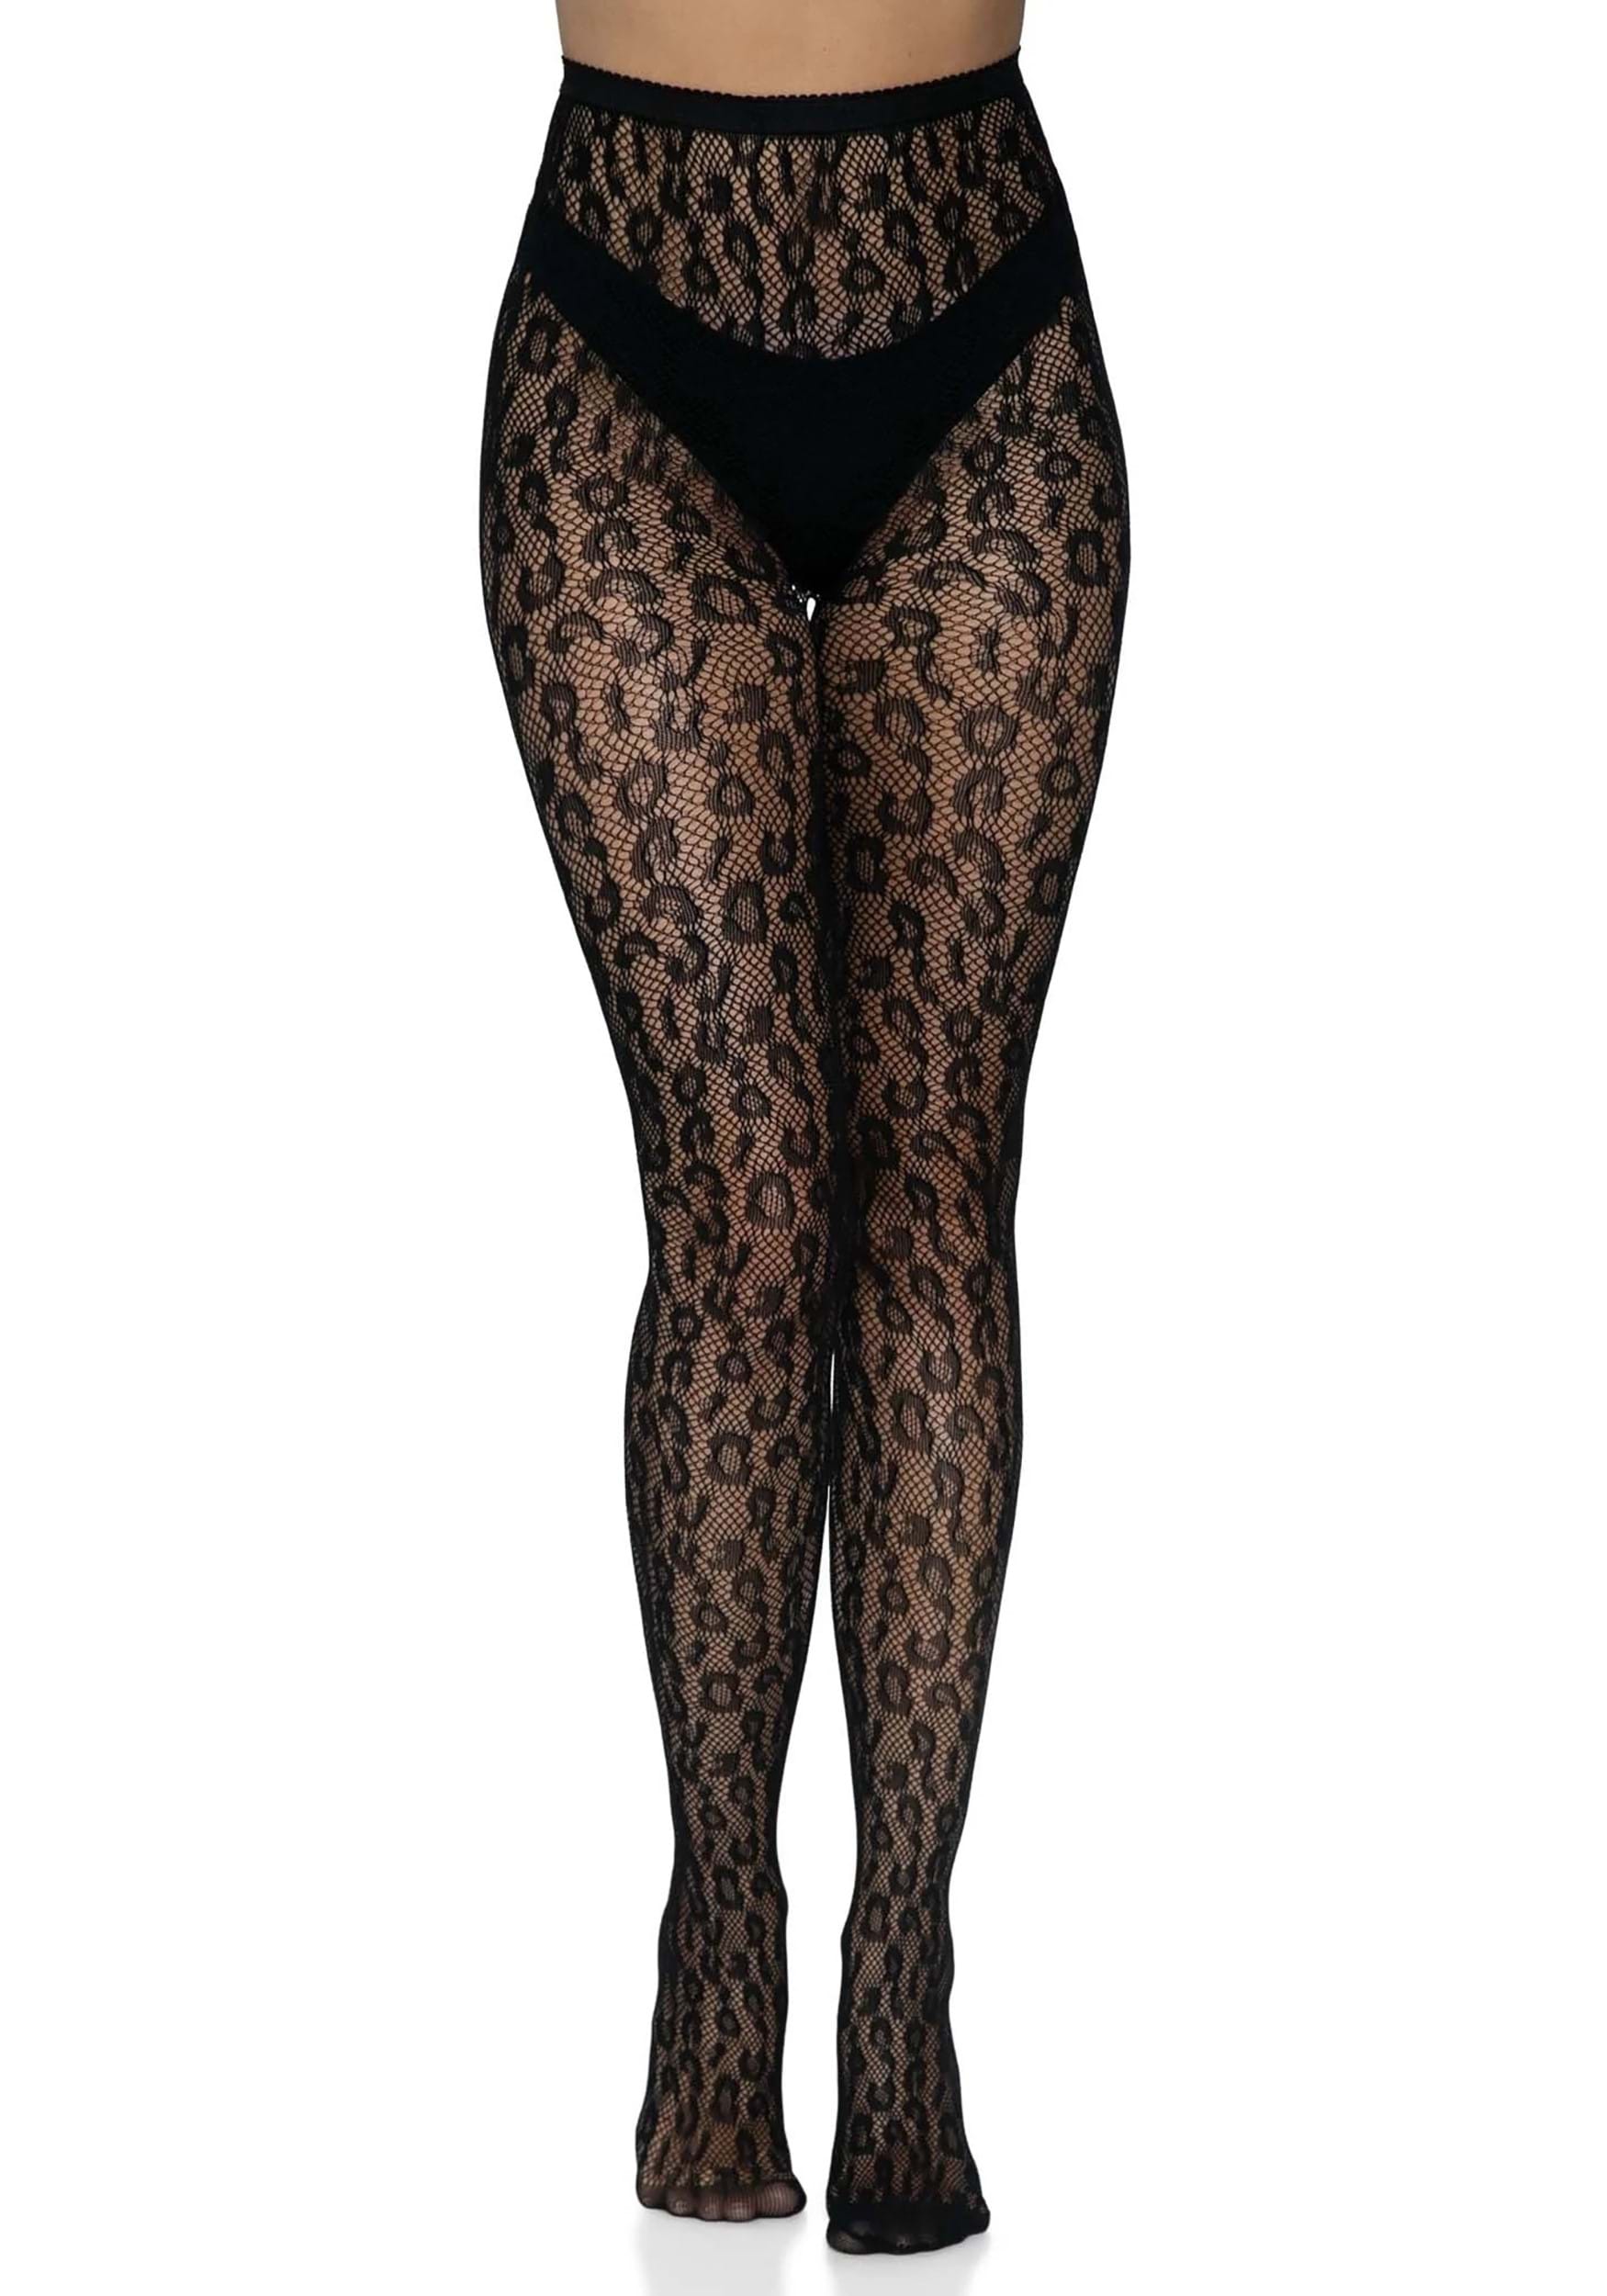 Prowl & Pounce Black Sheer Leopard Print Tights